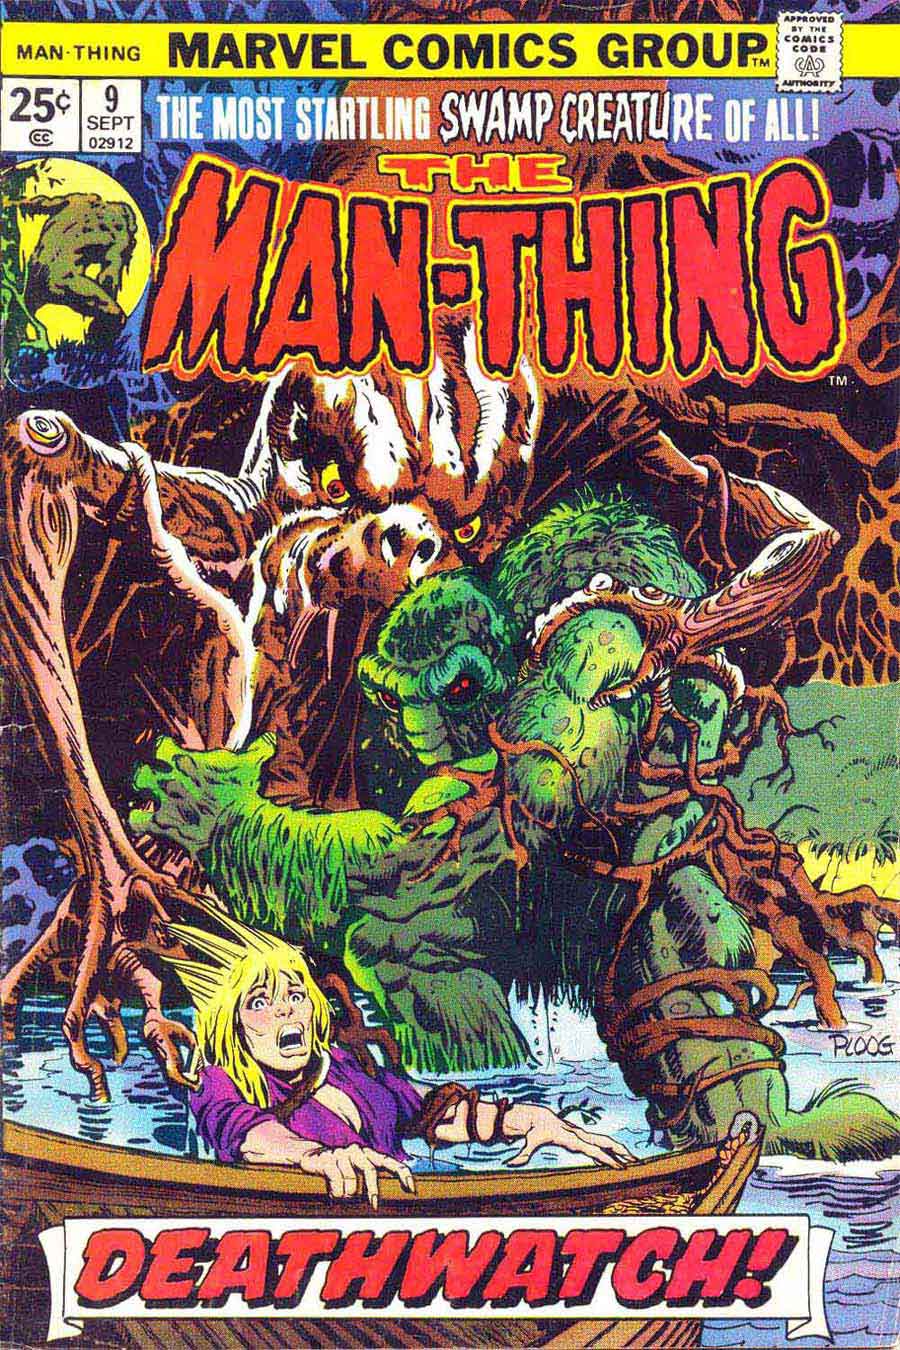 Man-Thing v1 #9 marvel 1970s bronze age comic book cover art by Mike Ploog